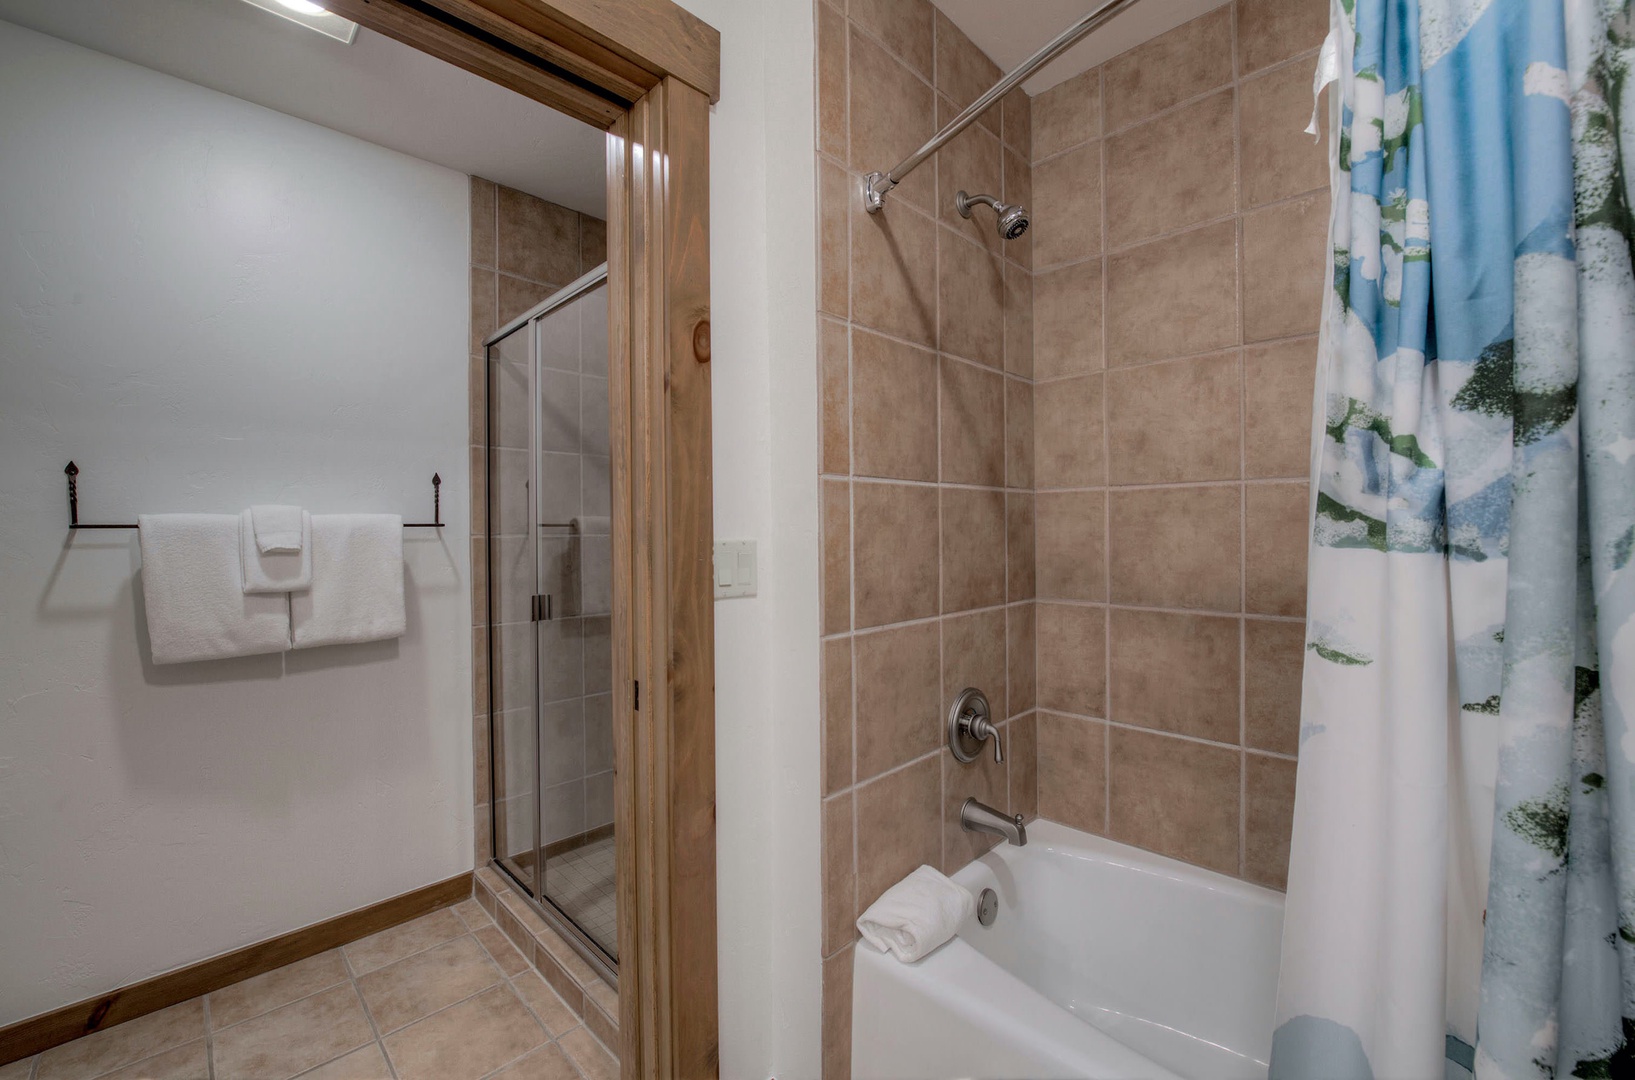 Main bathroom with dual sinks and shower/tub combo